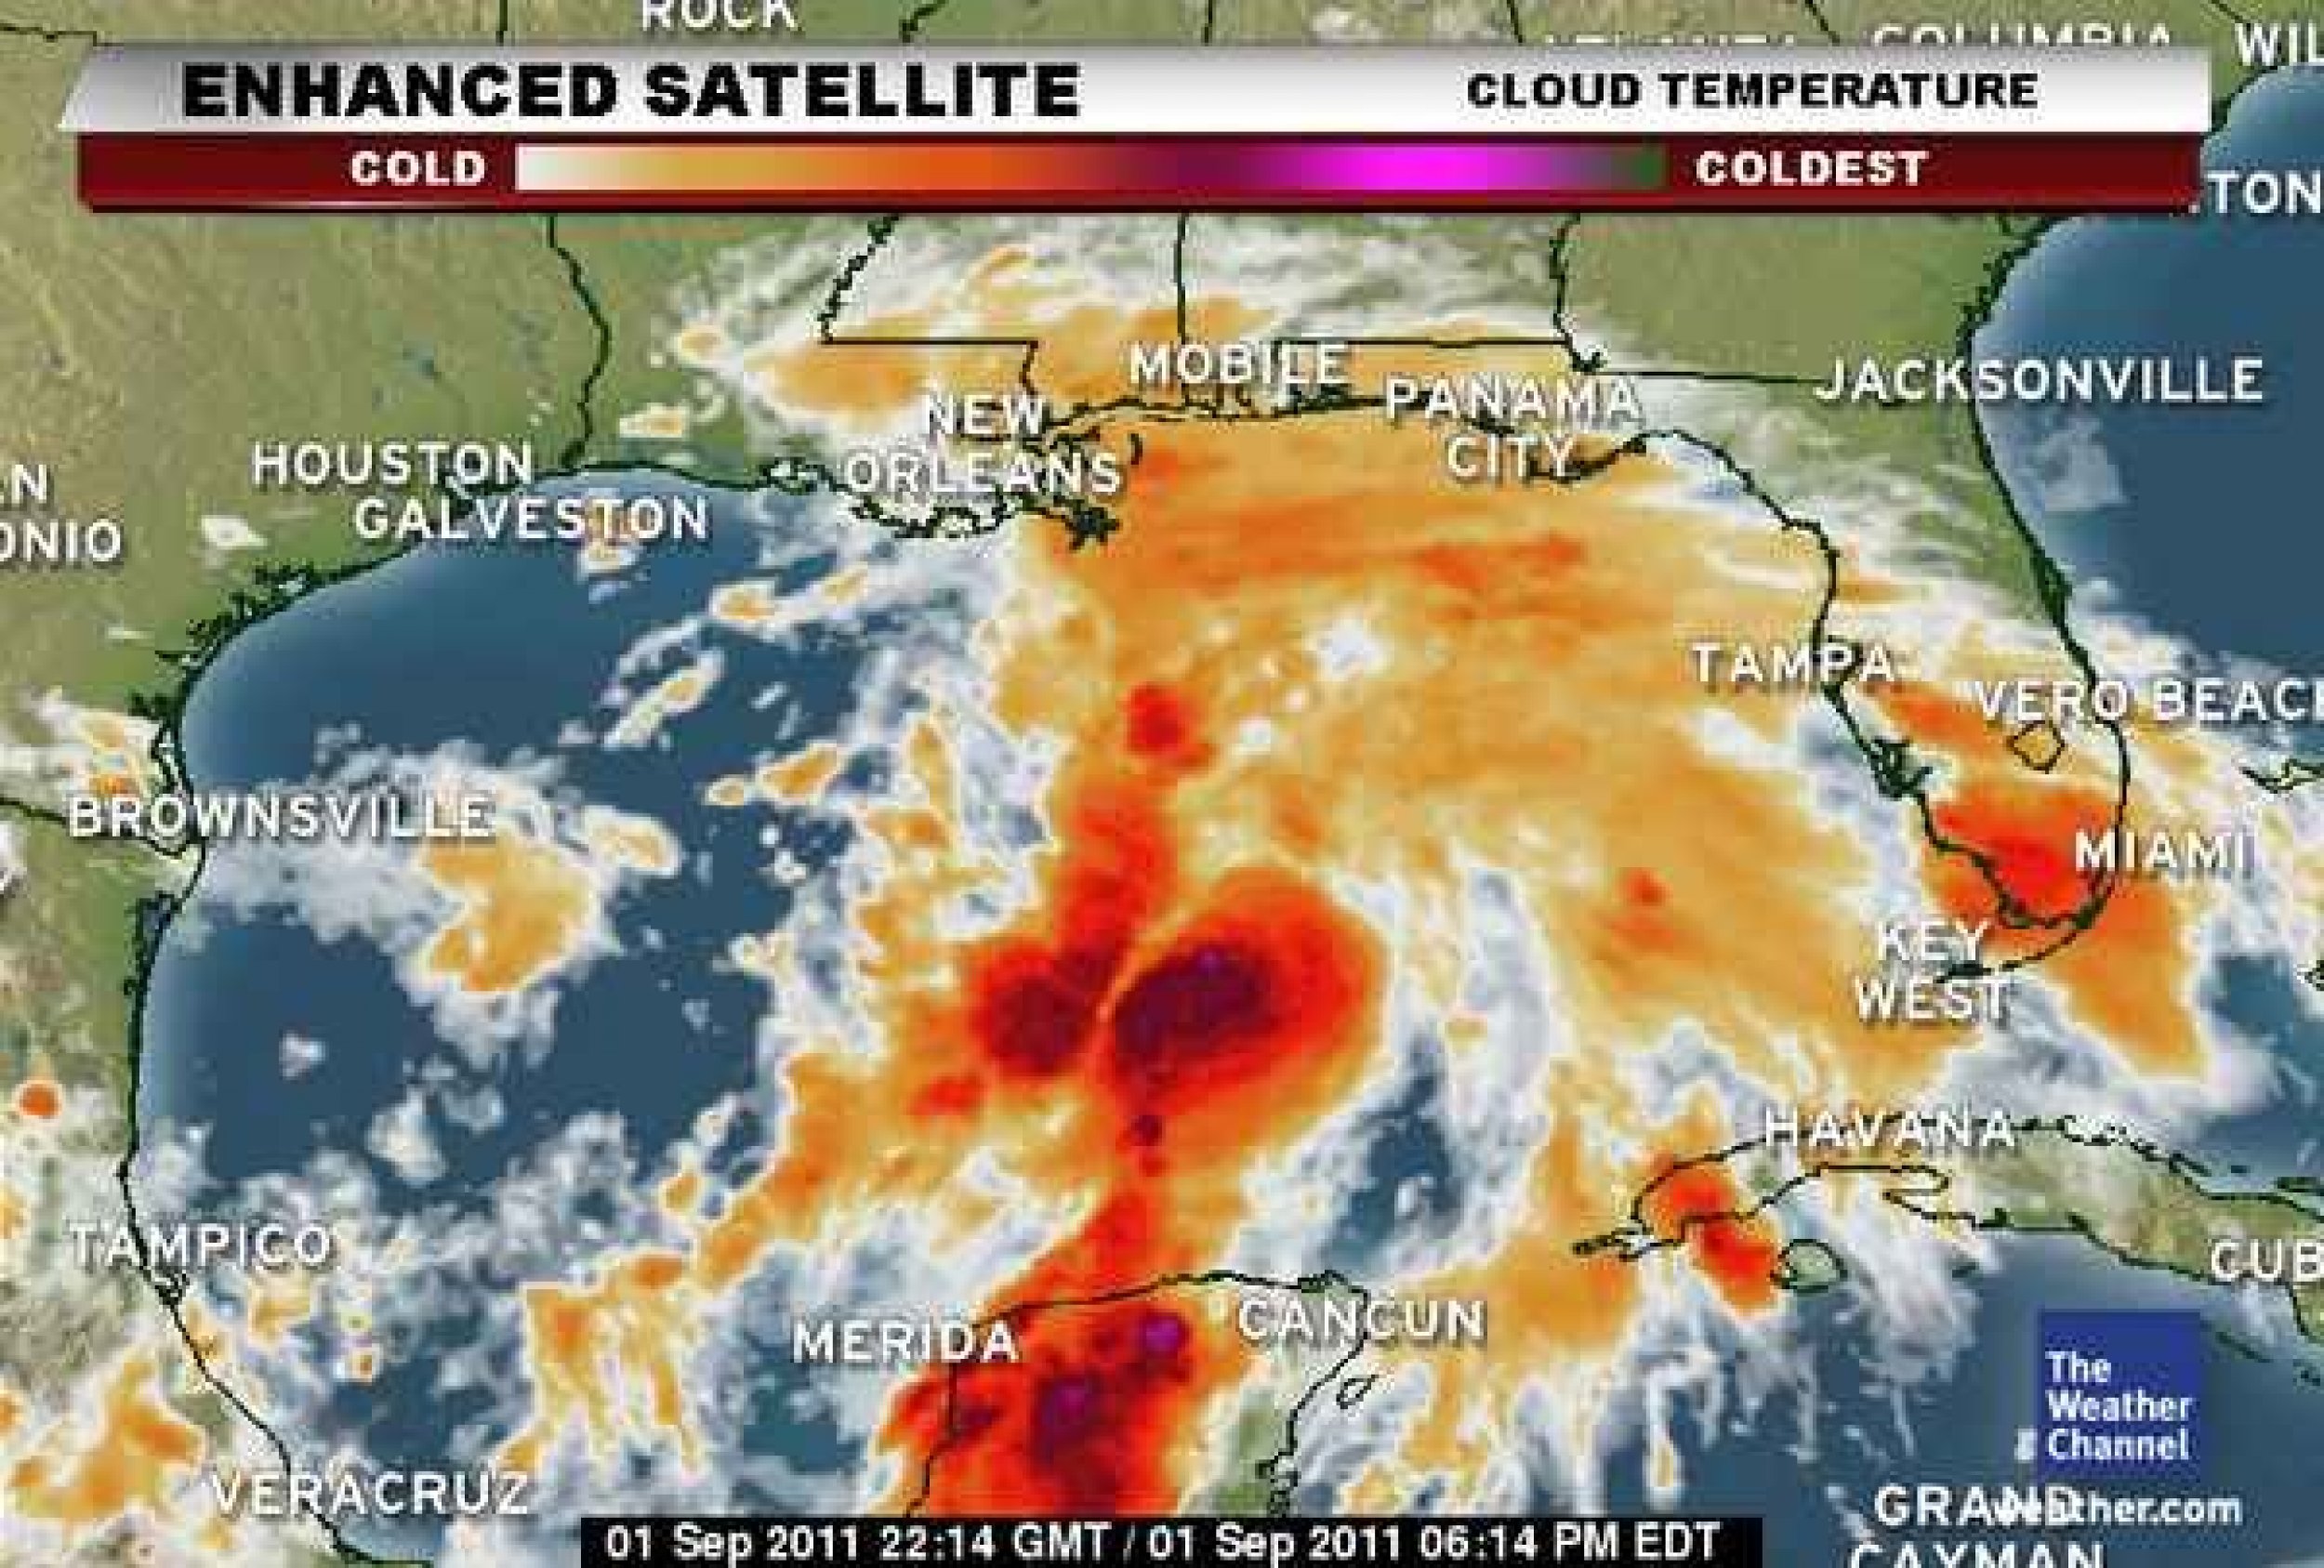 Satellite activity of the disturbance moving into the Gulf